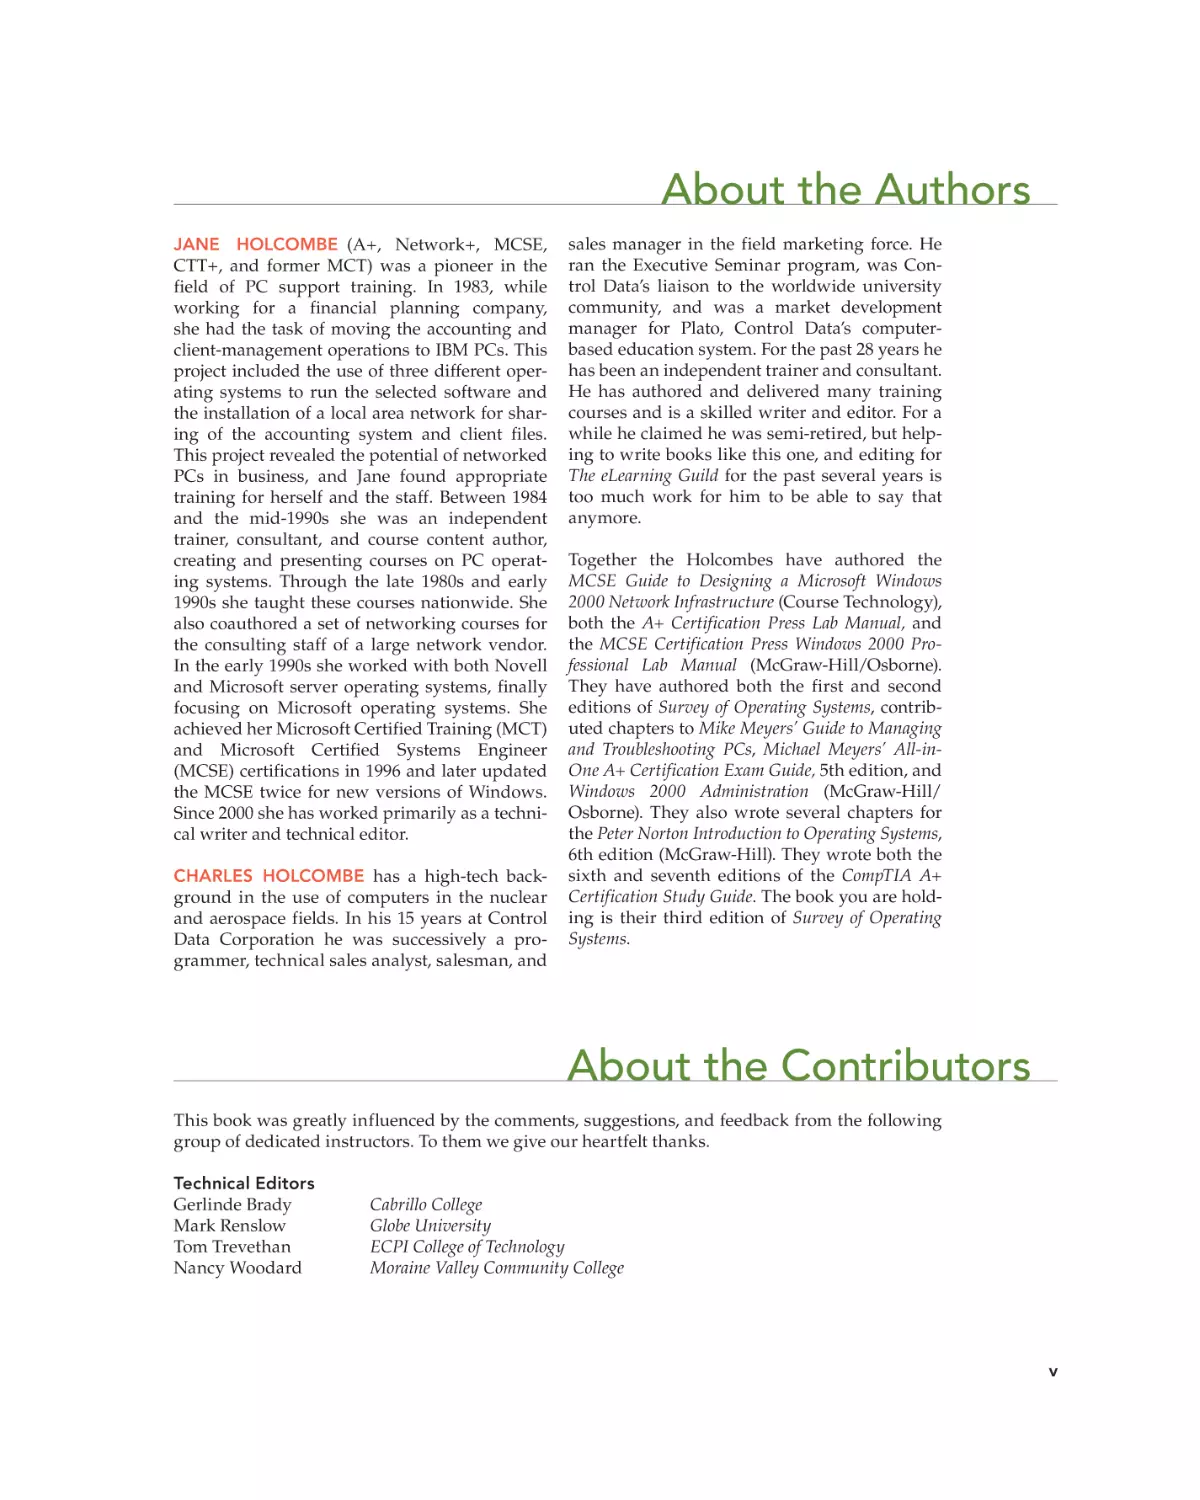 About the Authors
About the Contributors